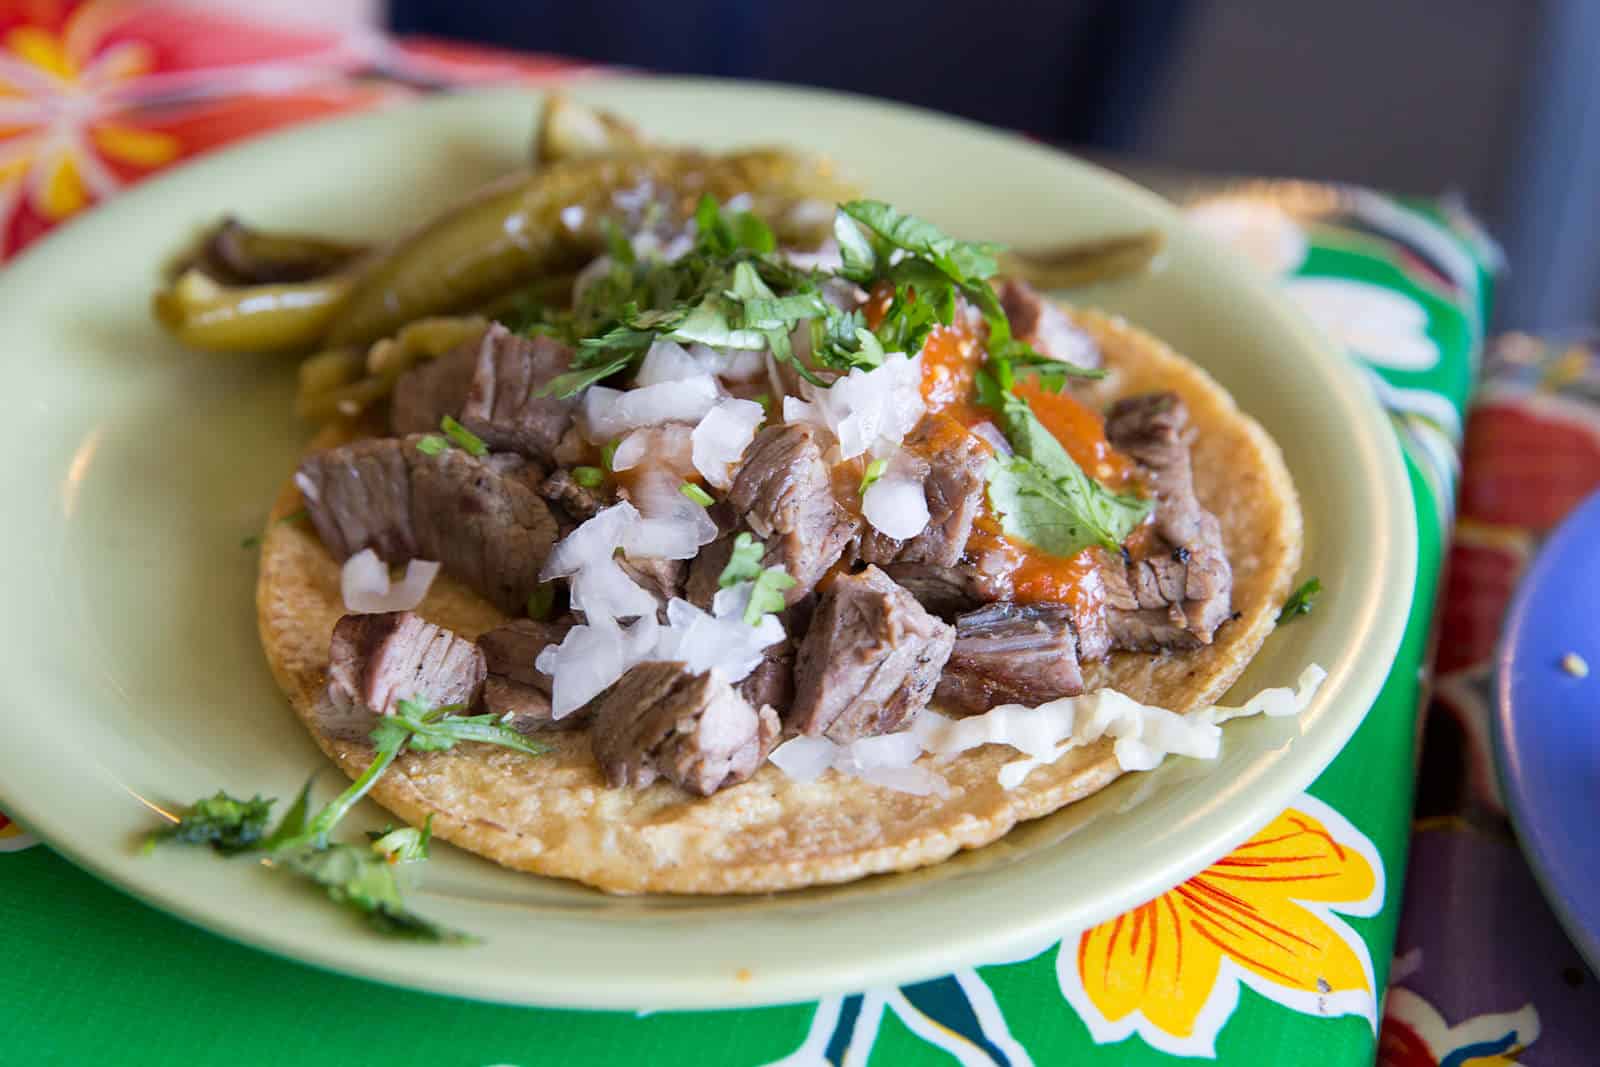 Panchita’s Mexican Criolla Cuisine of New Orleans